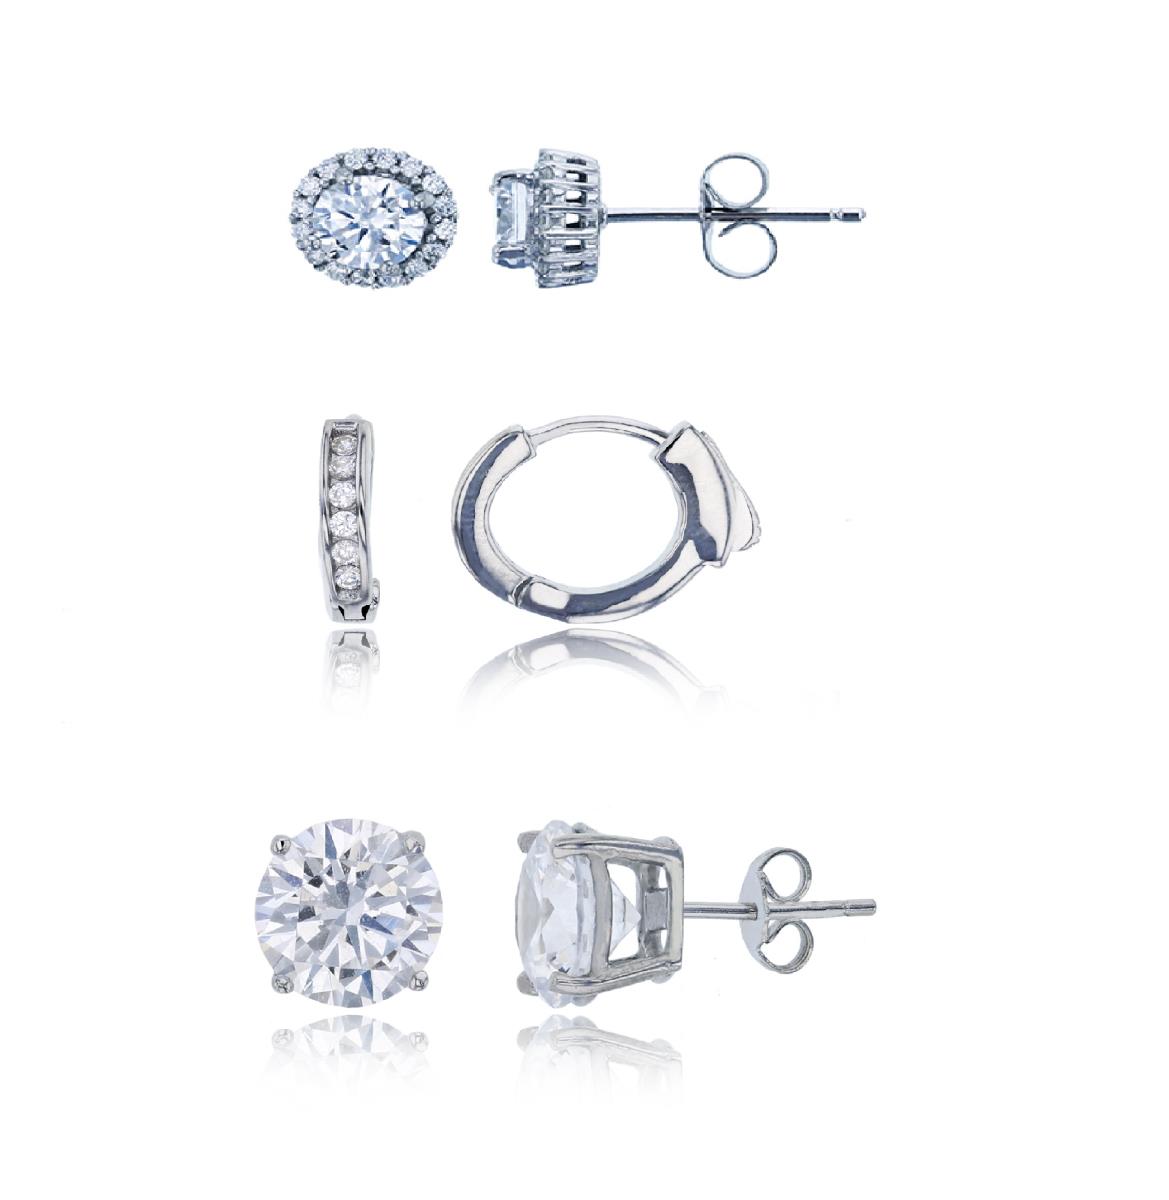 Sterling Silver Rhodium 12x3mm 1-Row Huggie, 8mm Rd Solitaire & 2.75mm Rd Halo Stud Earring Set